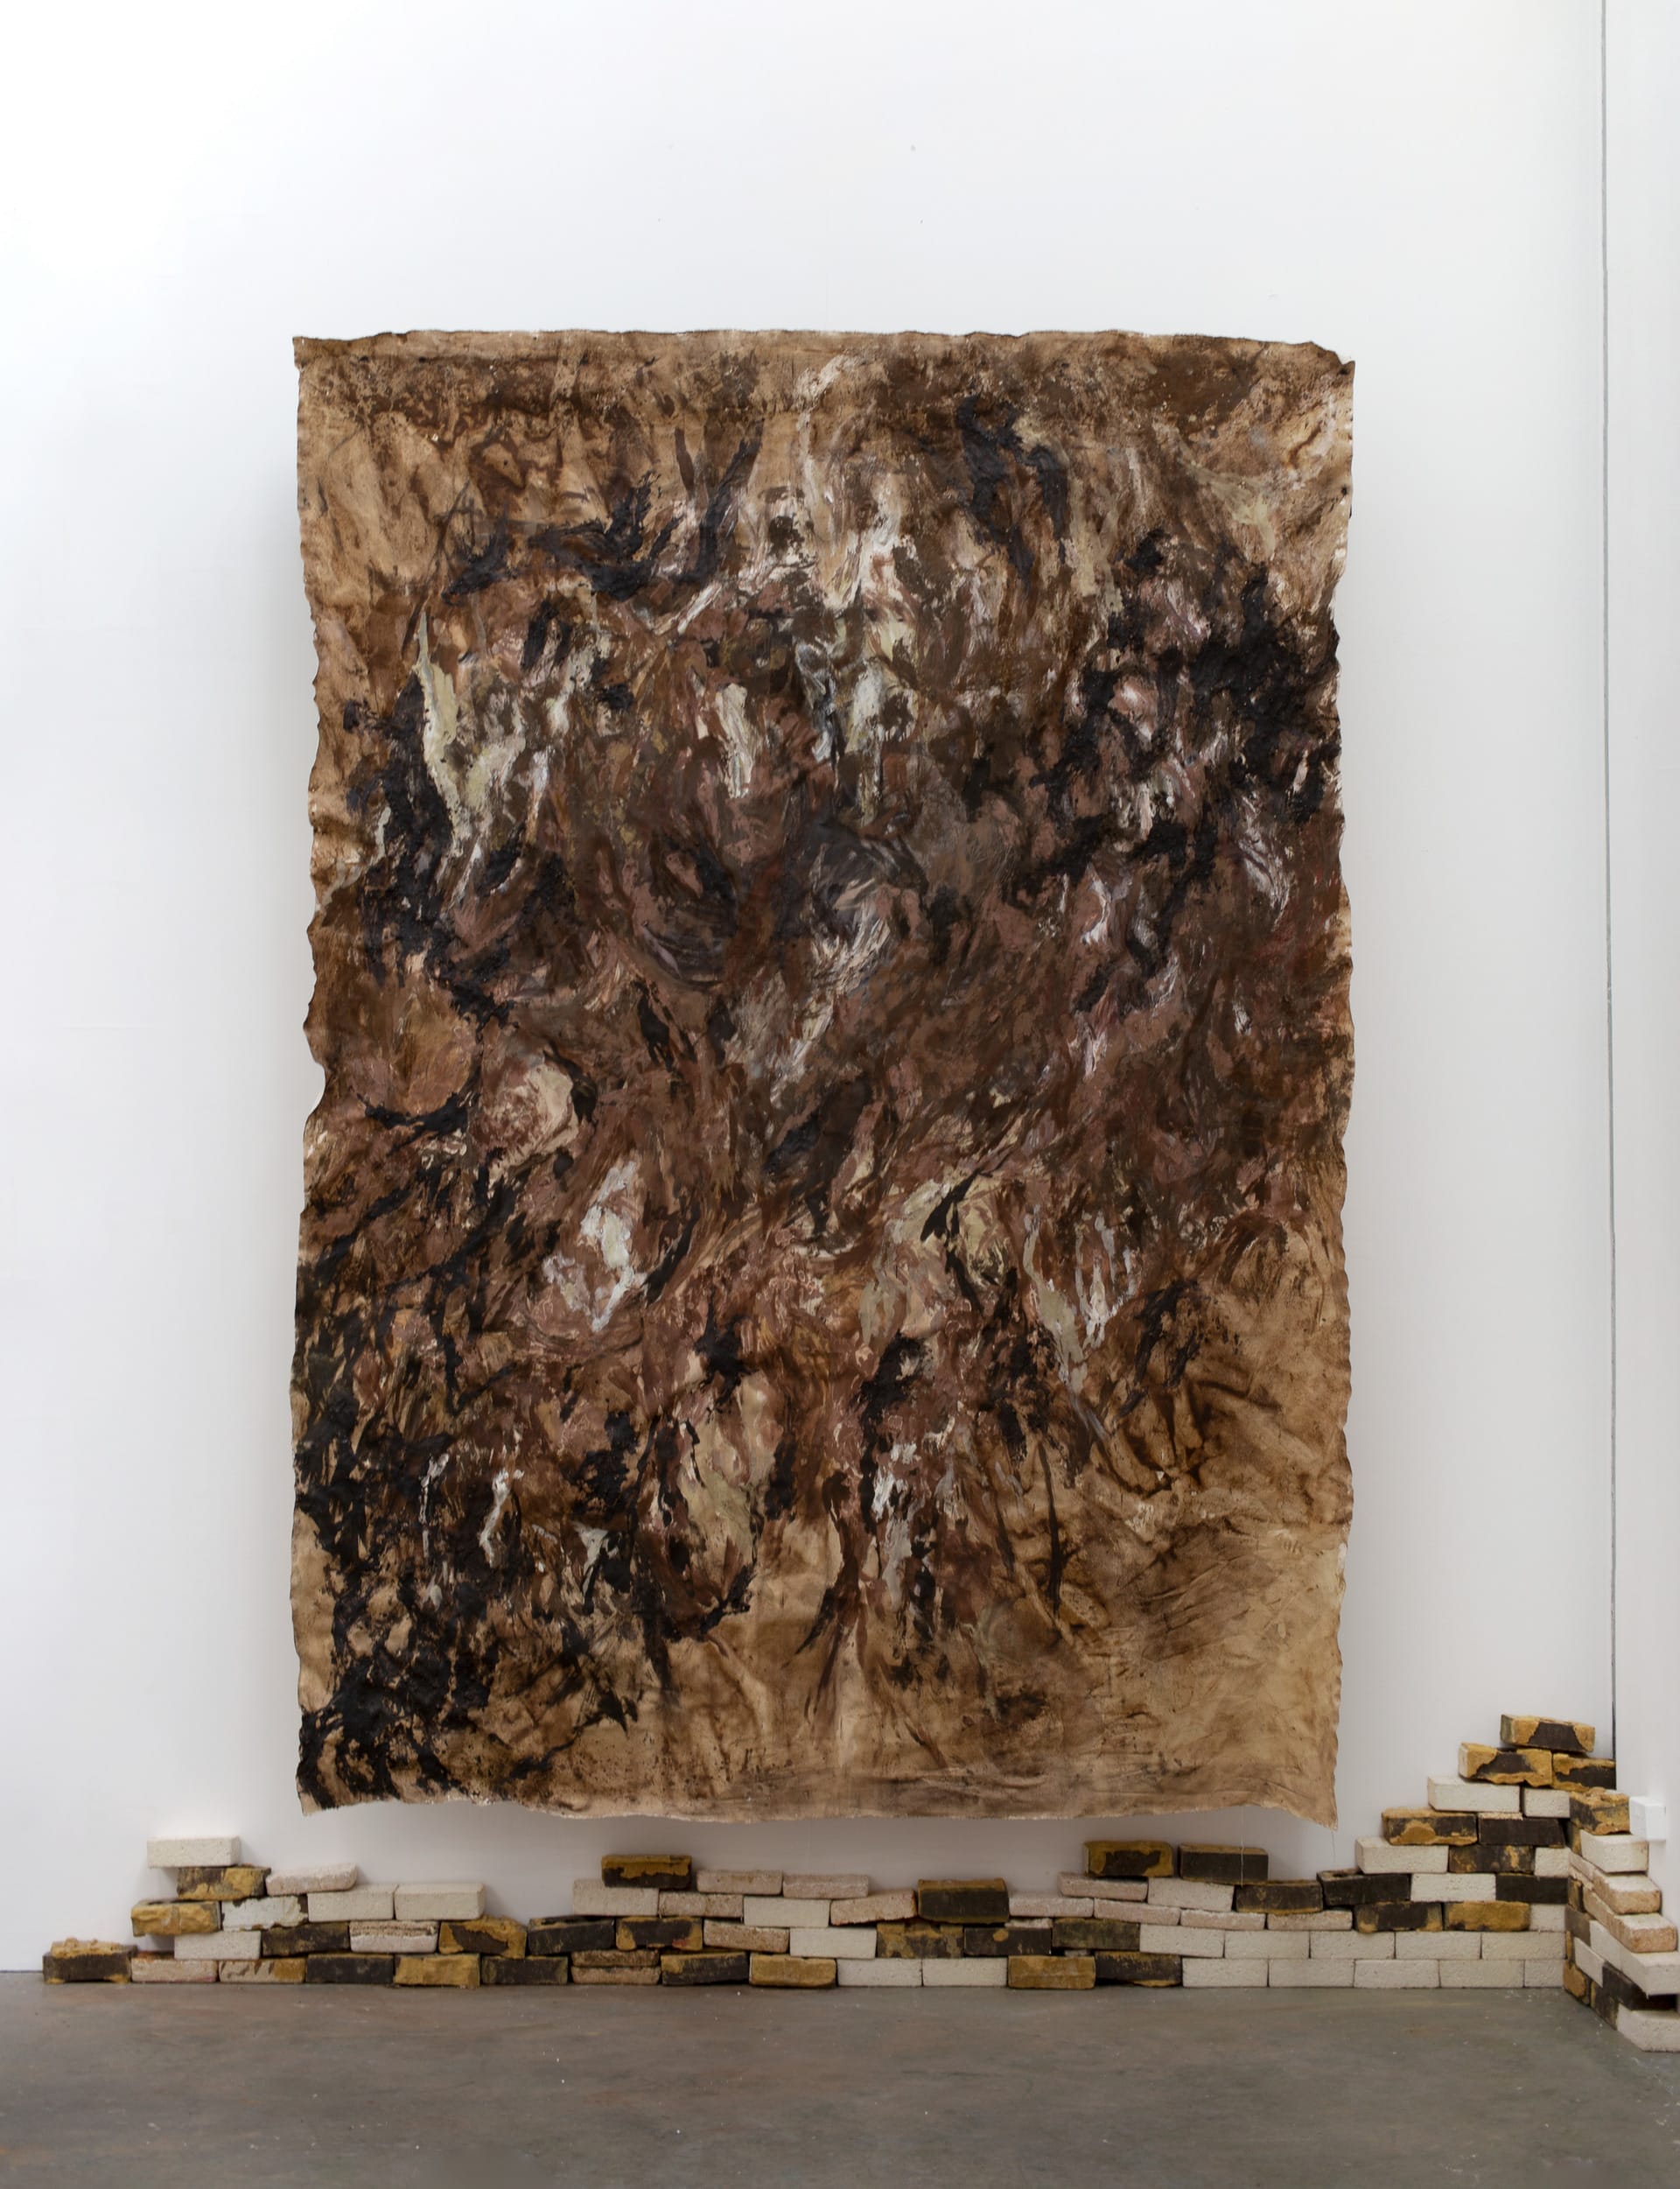 Large, 4 meter brown, abstract painting hung above a short decaying wall of bricks and mycelial composites